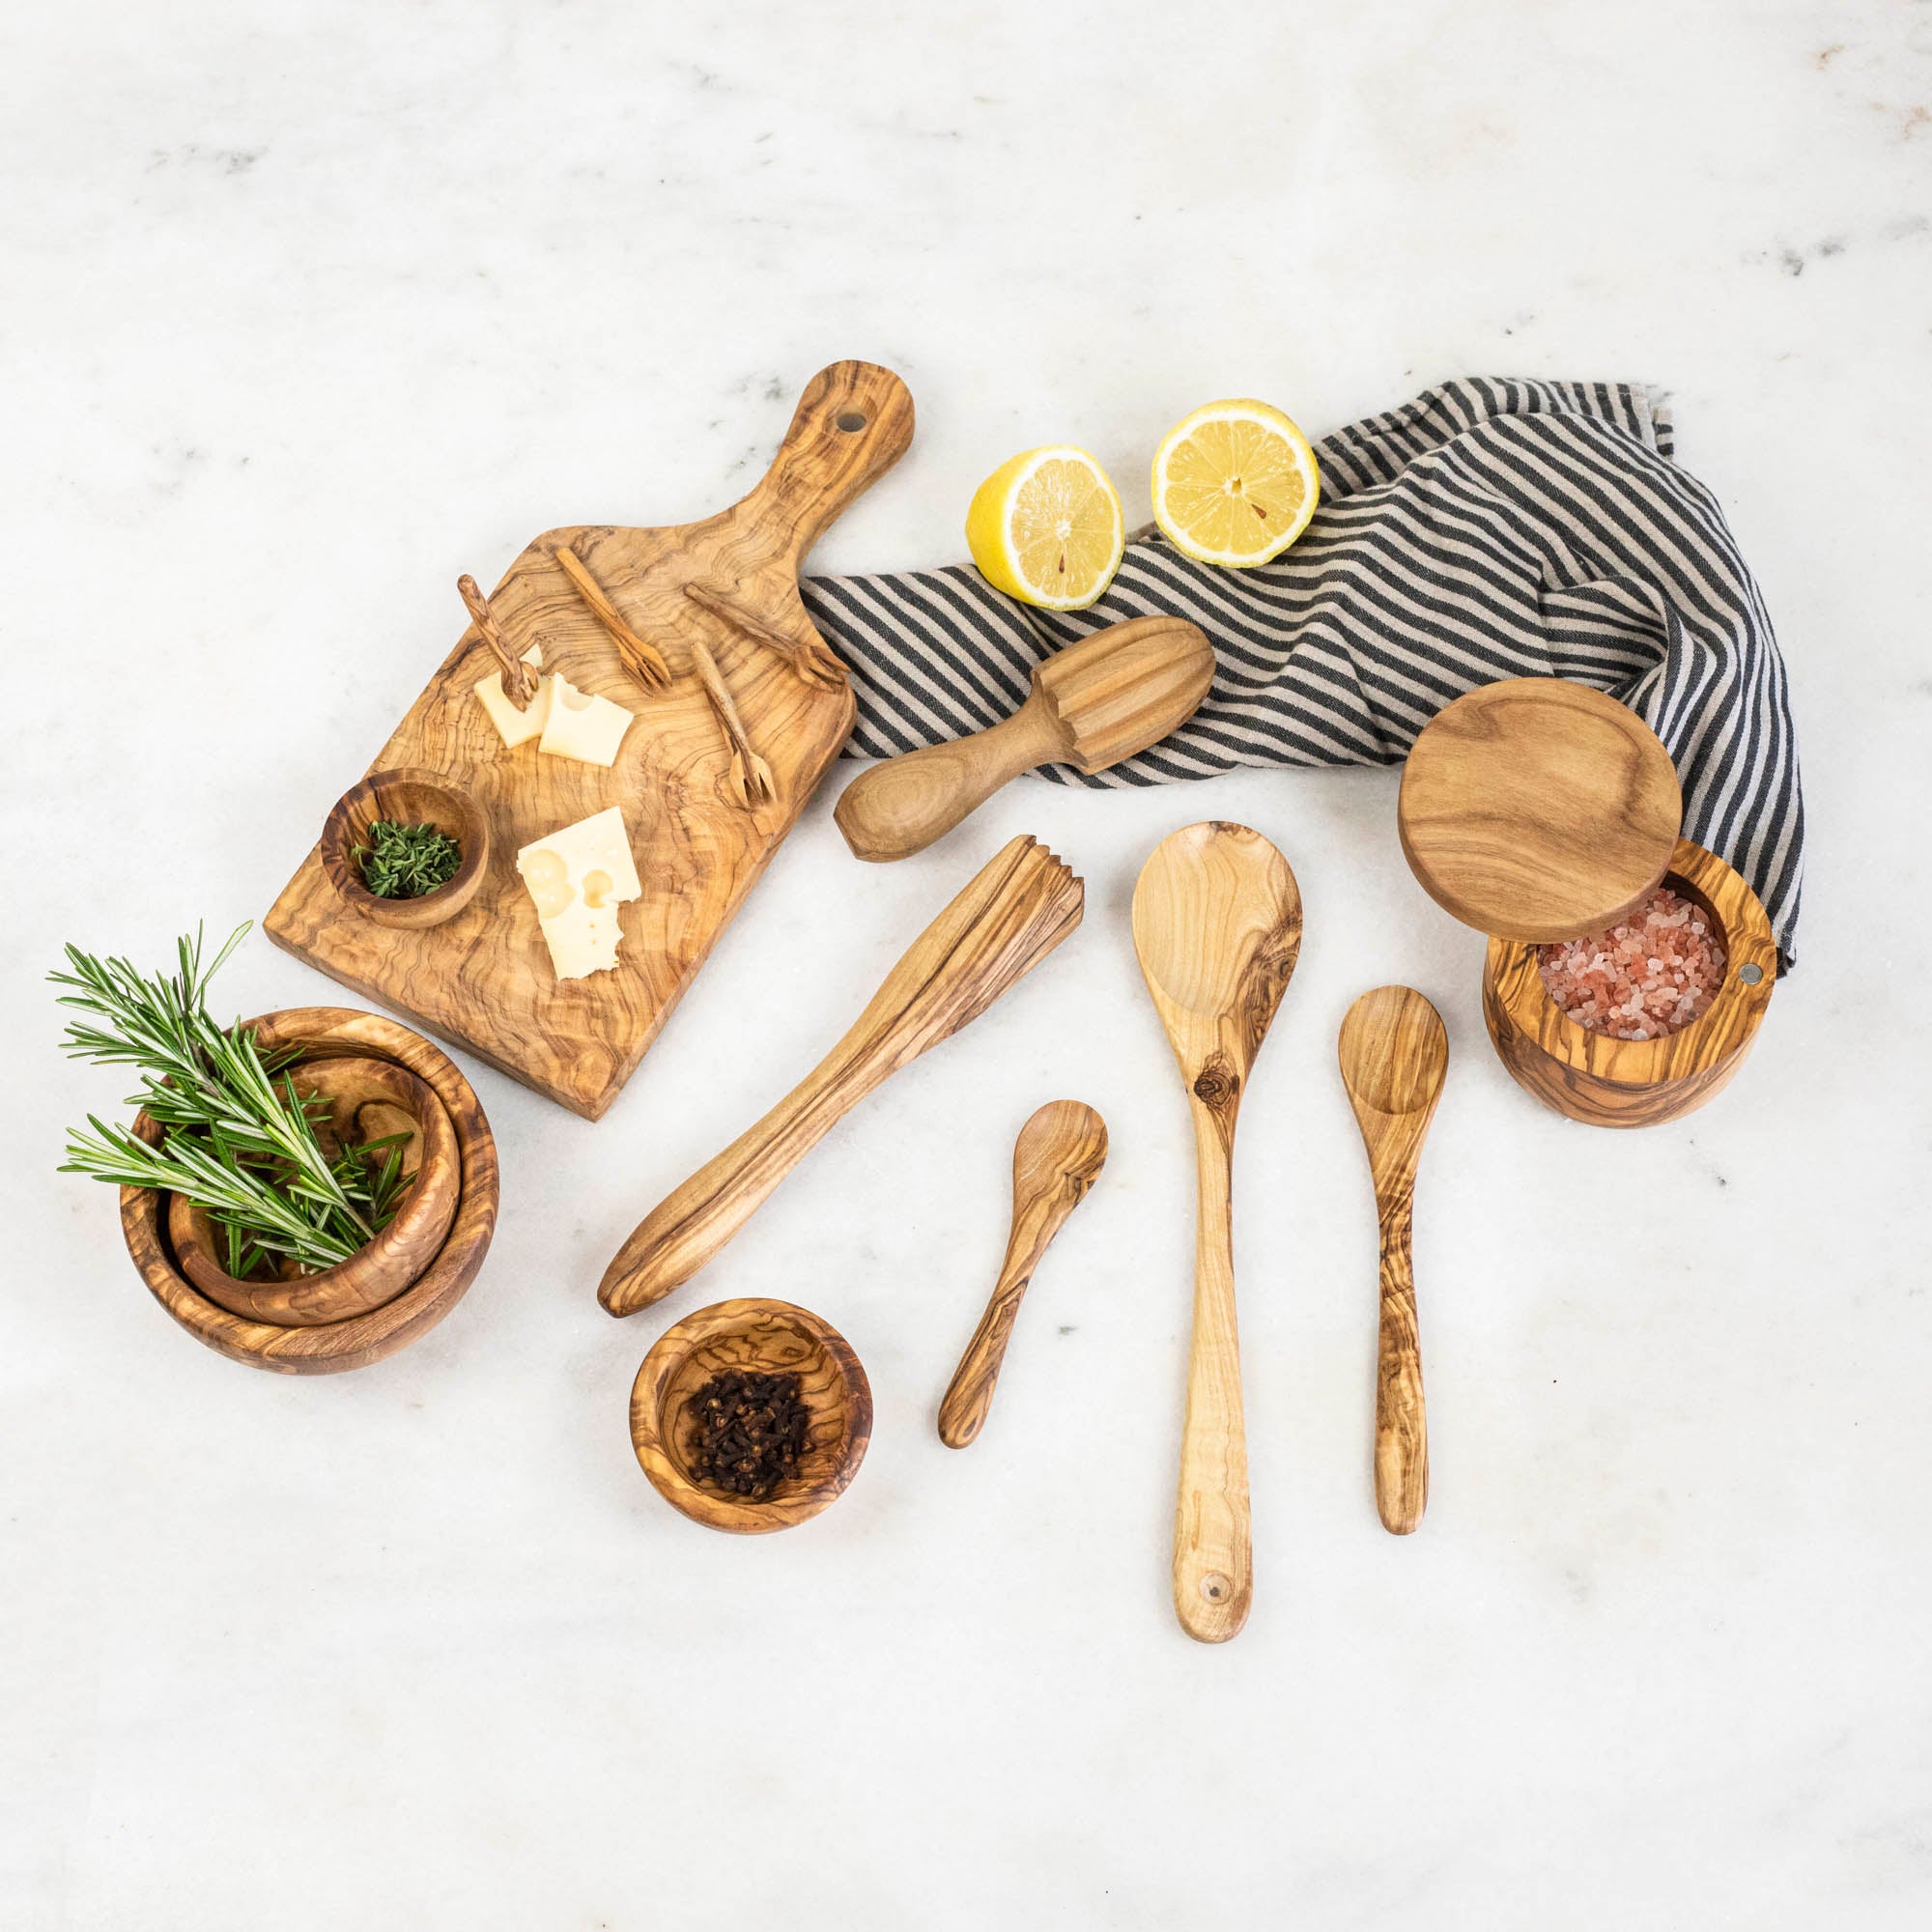 Natural Olivewood utensils for bread cutting and cheese slicing.